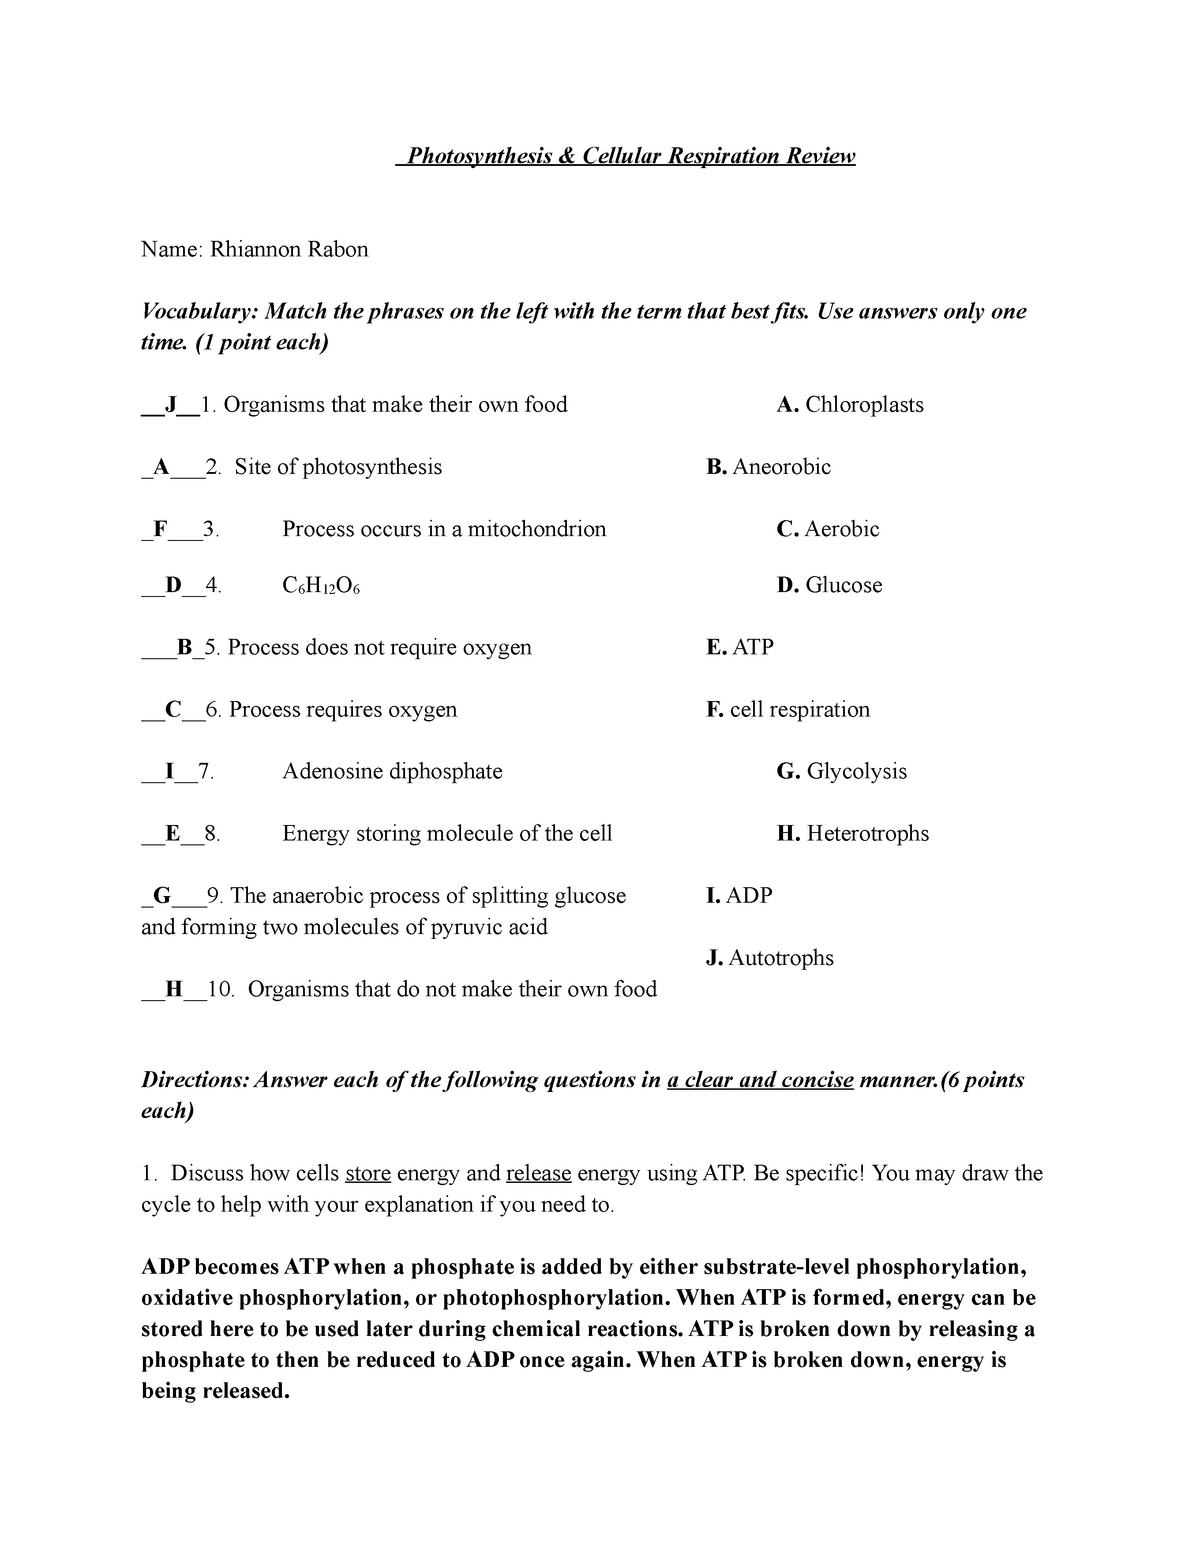 Photosynthesis & Cellular Respiration Review - BIO-23 - General With Cellular Respiration Worksheet Answer Key